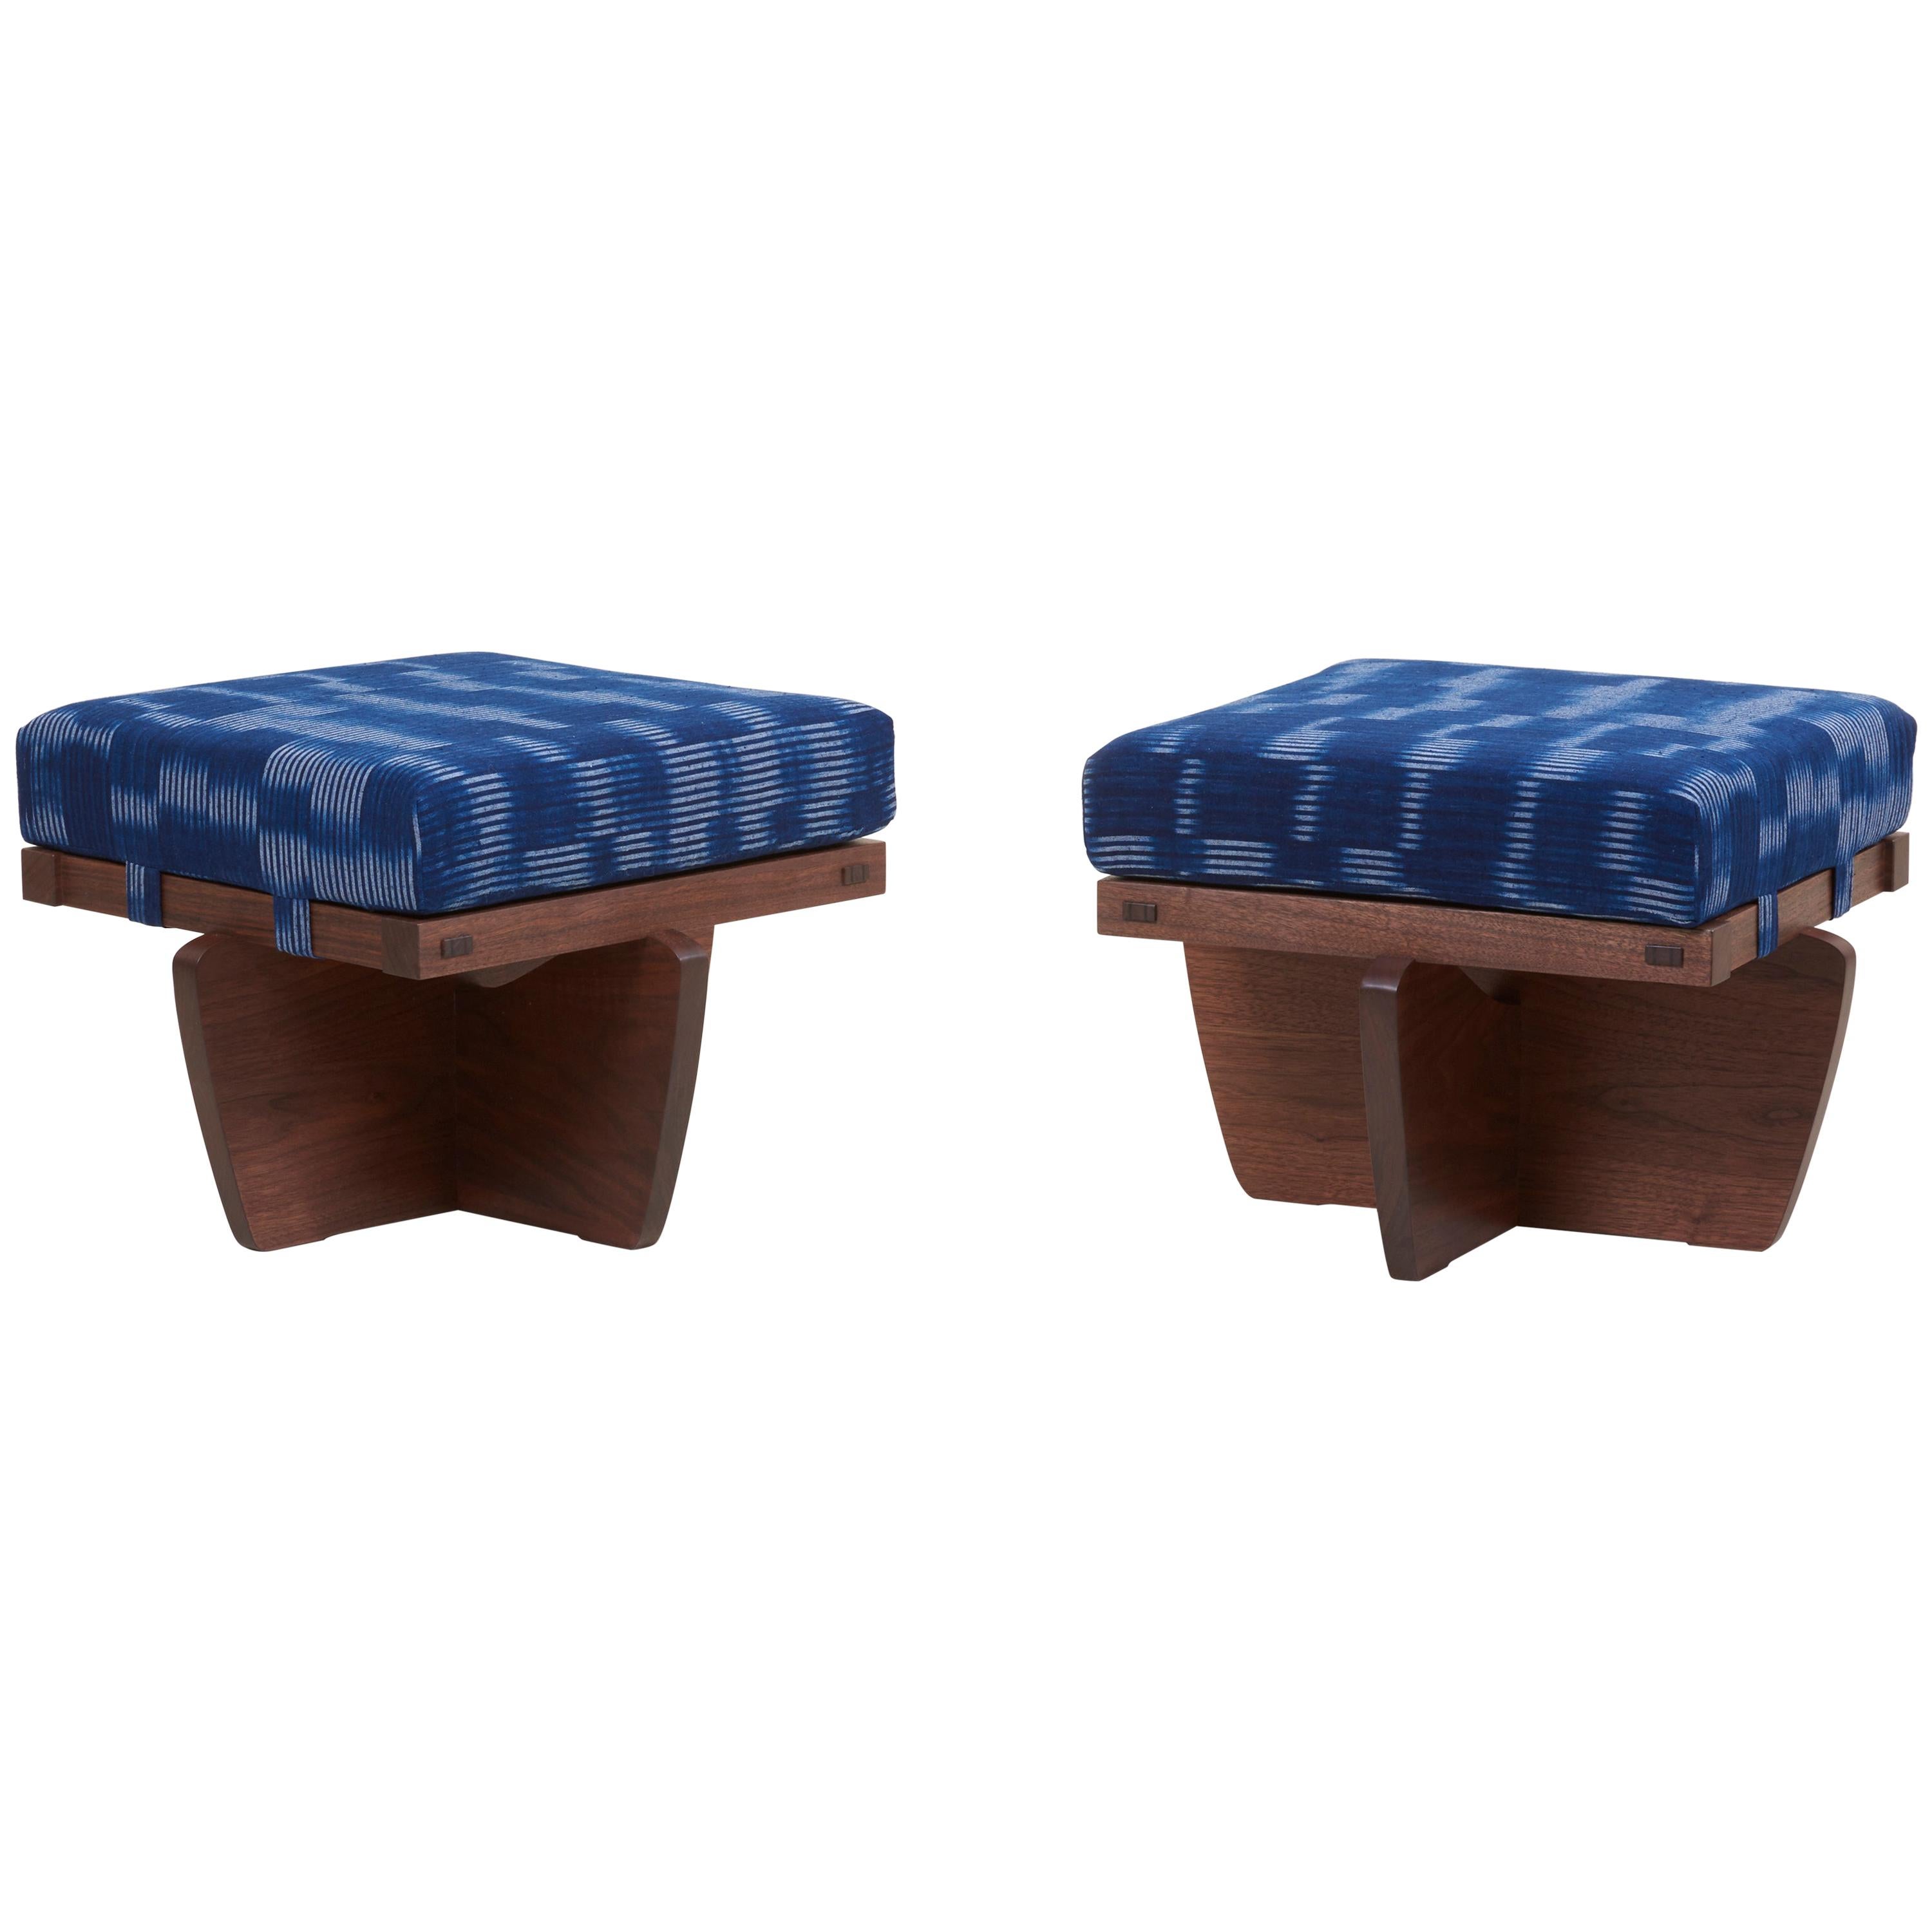 Pair of Greenrock Ottomans by George Nakashima